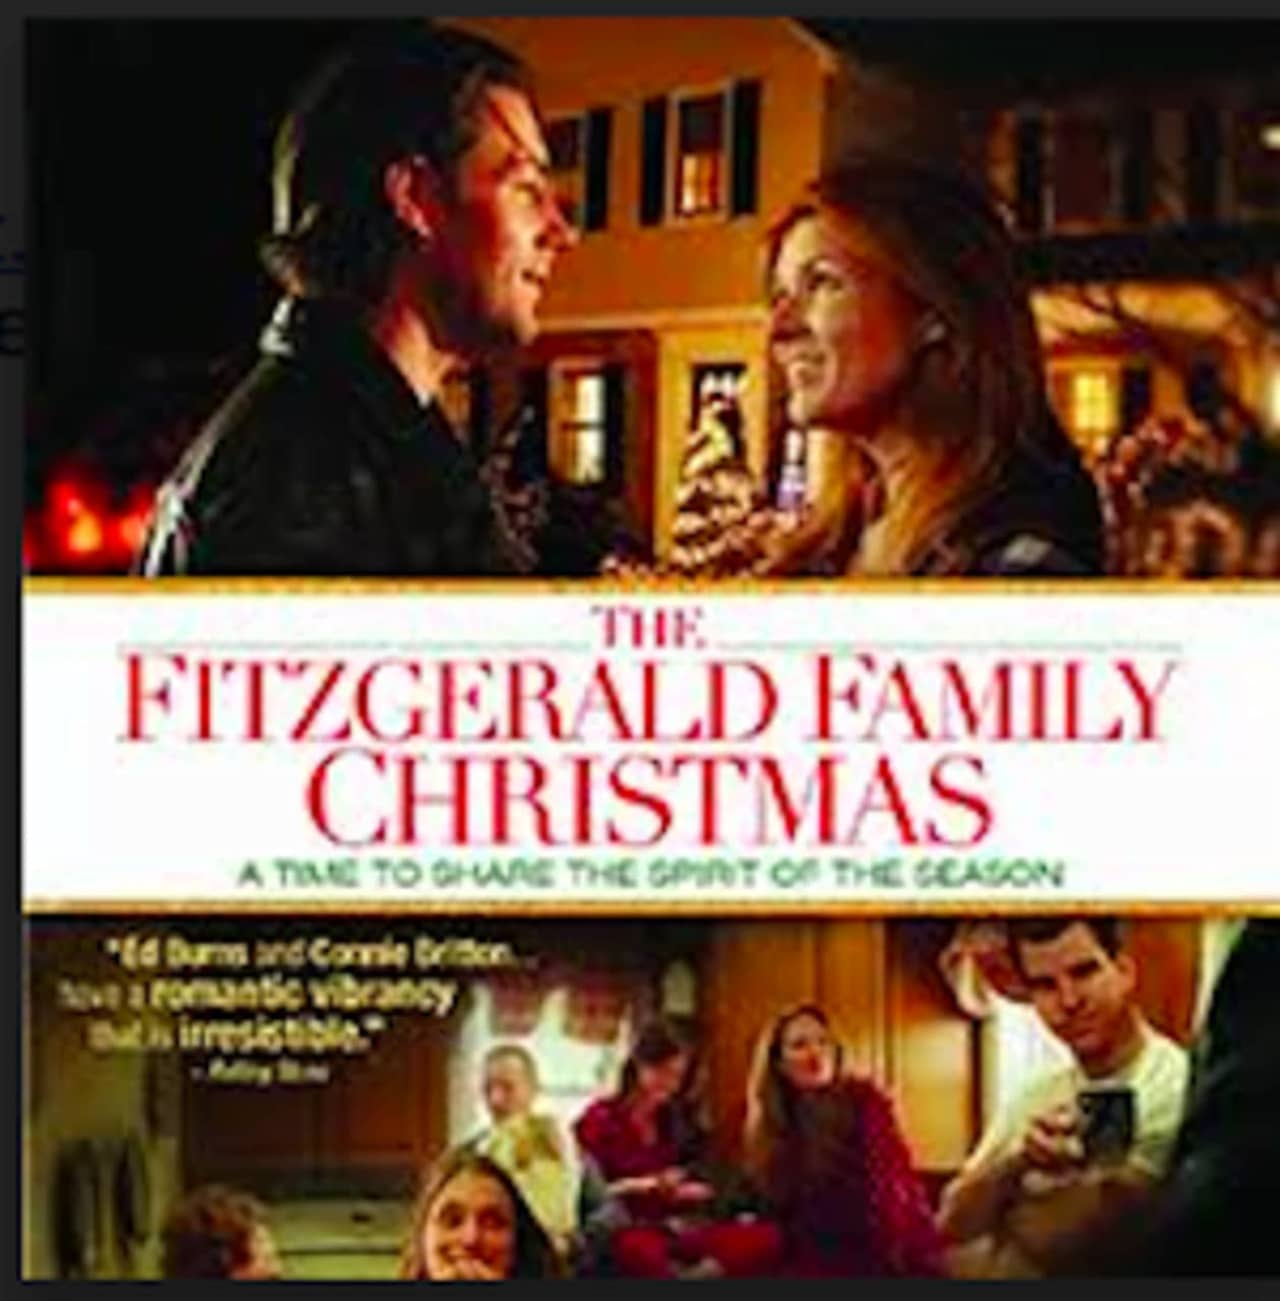 "The Fitzgerald Family Christmas" will be shown for free at Norwalk Community College on Dec. 8 as part of the college's monthly film series.